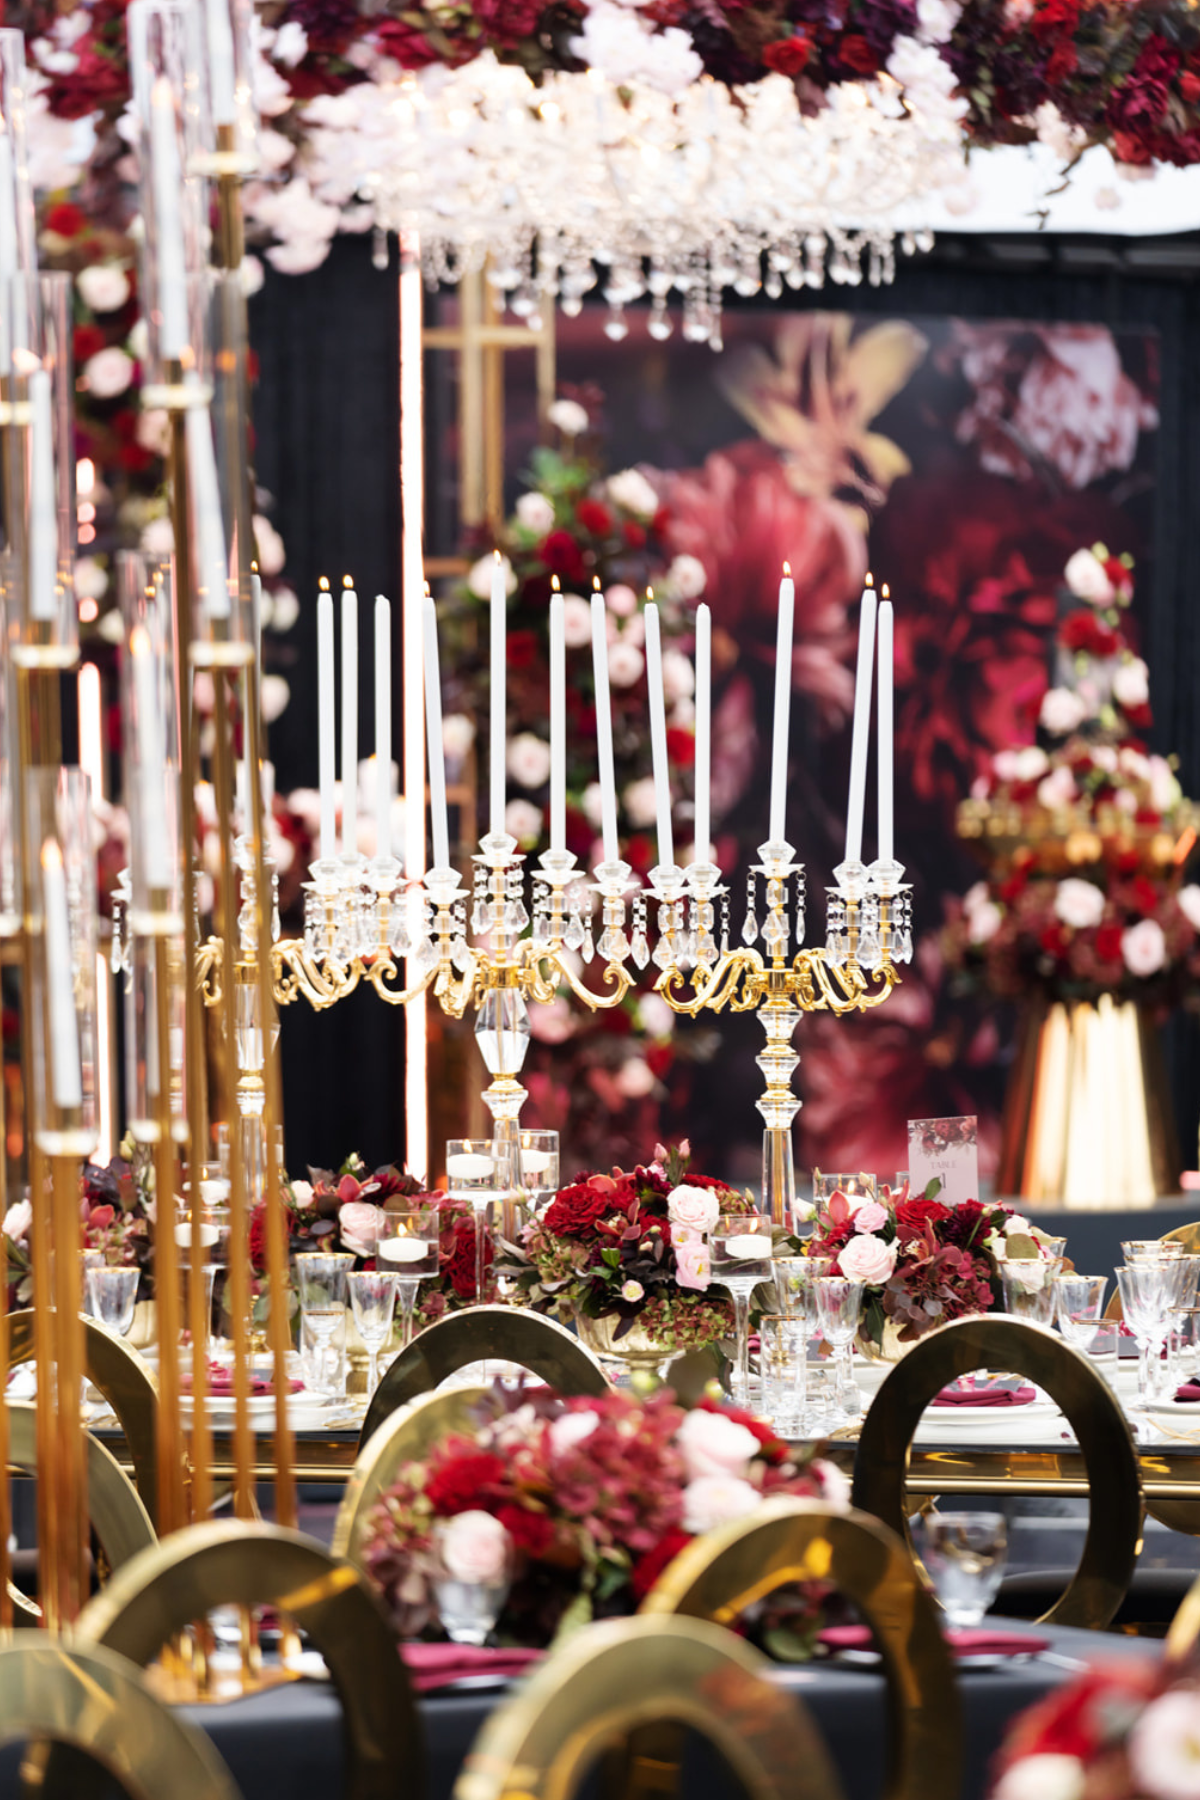 black-gold-burgundy-red-tent-reception-chandeliers-roses-candelabras-chair-candles